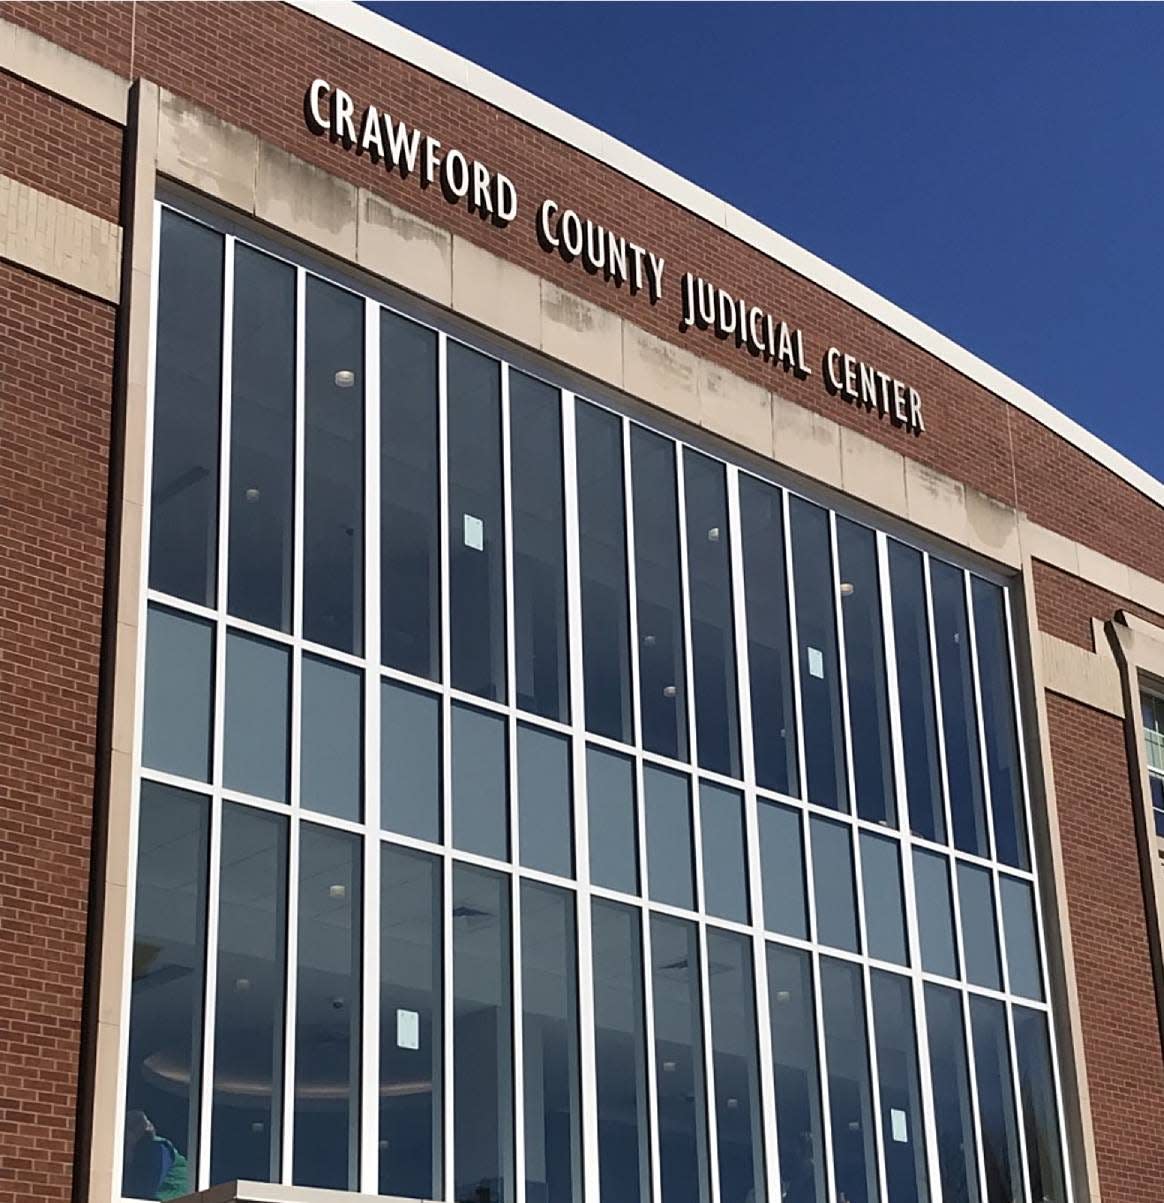 Meadville police have charged a city man with felony offenses after accusing him of phoning in a bomb threat that forced the evacuation of the Crawford County Judicial Center on Monday.